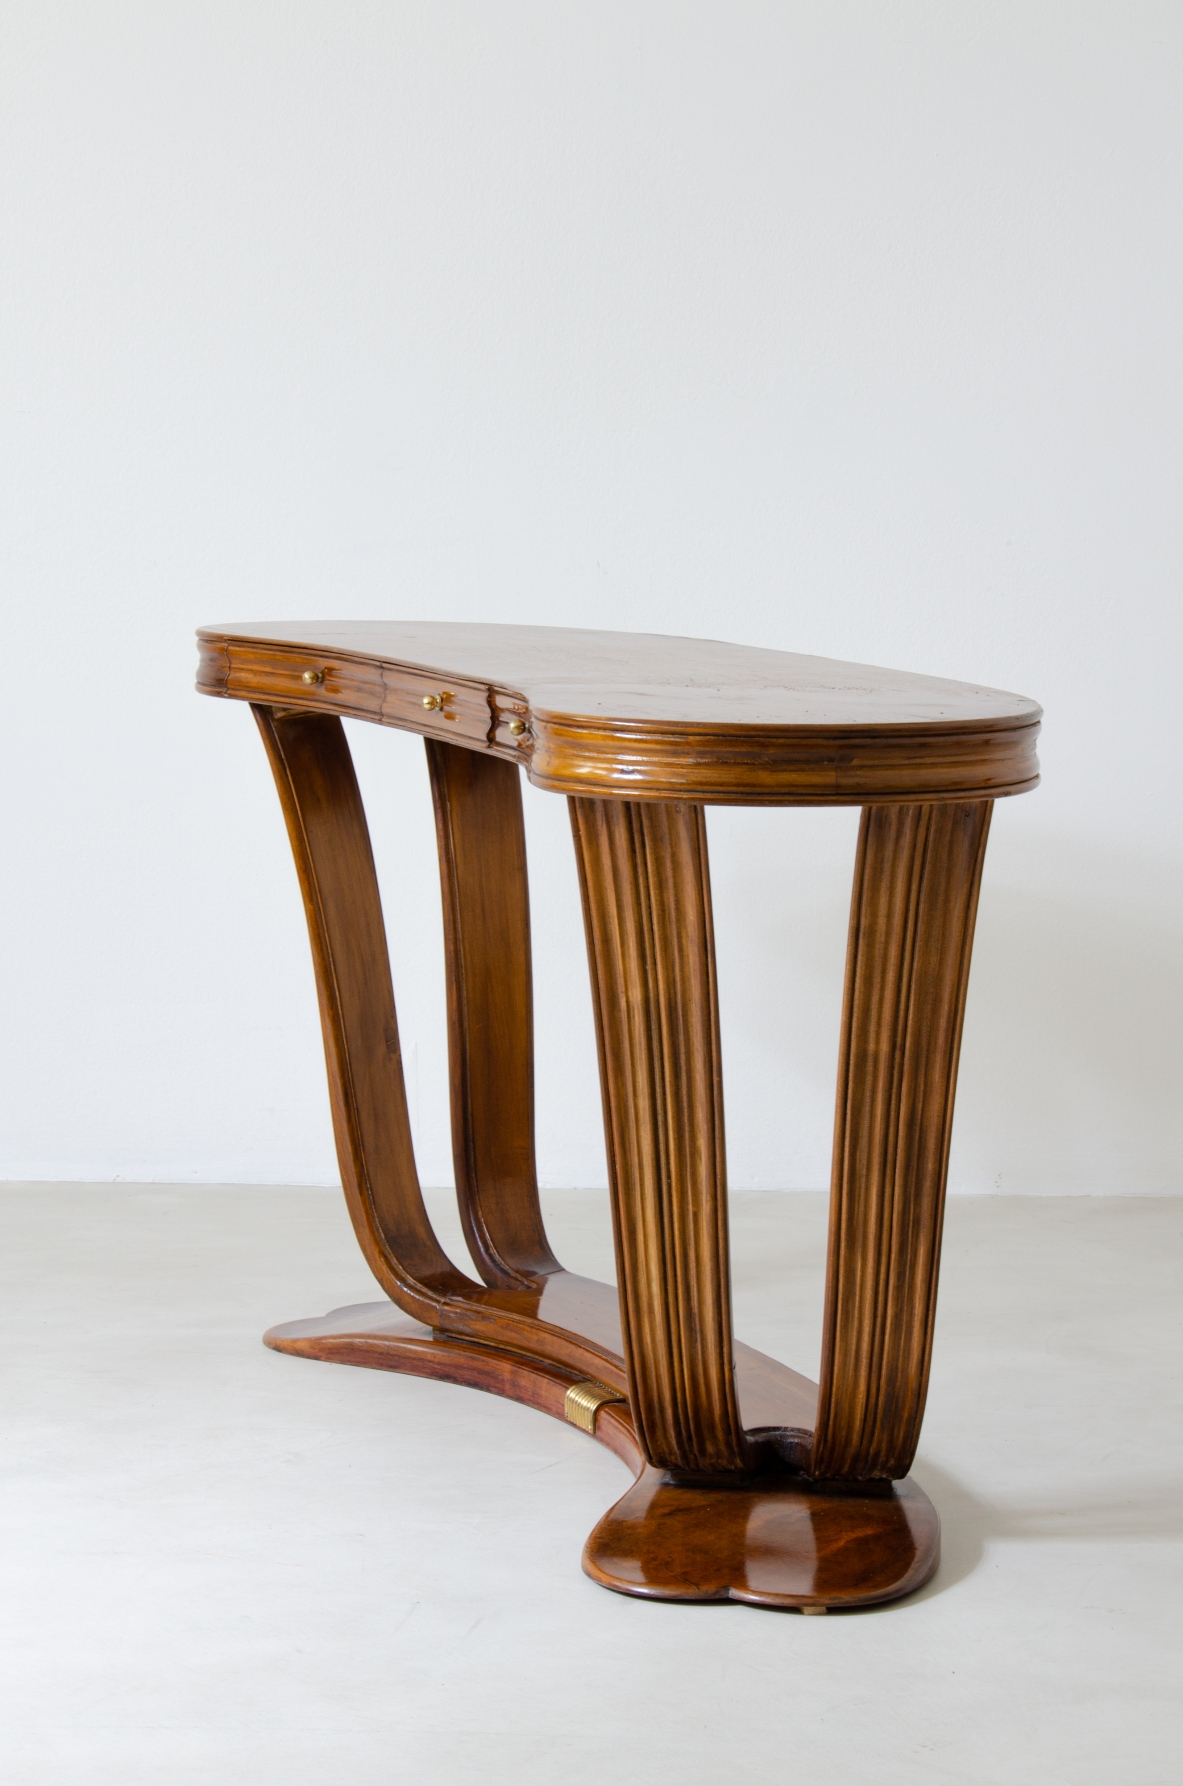 Osvaldo Borsani, elegant table / console in lacquered wood, with glass top and brass structure. Manufactured by Arredamenti Borsani, Italy 1940ca.